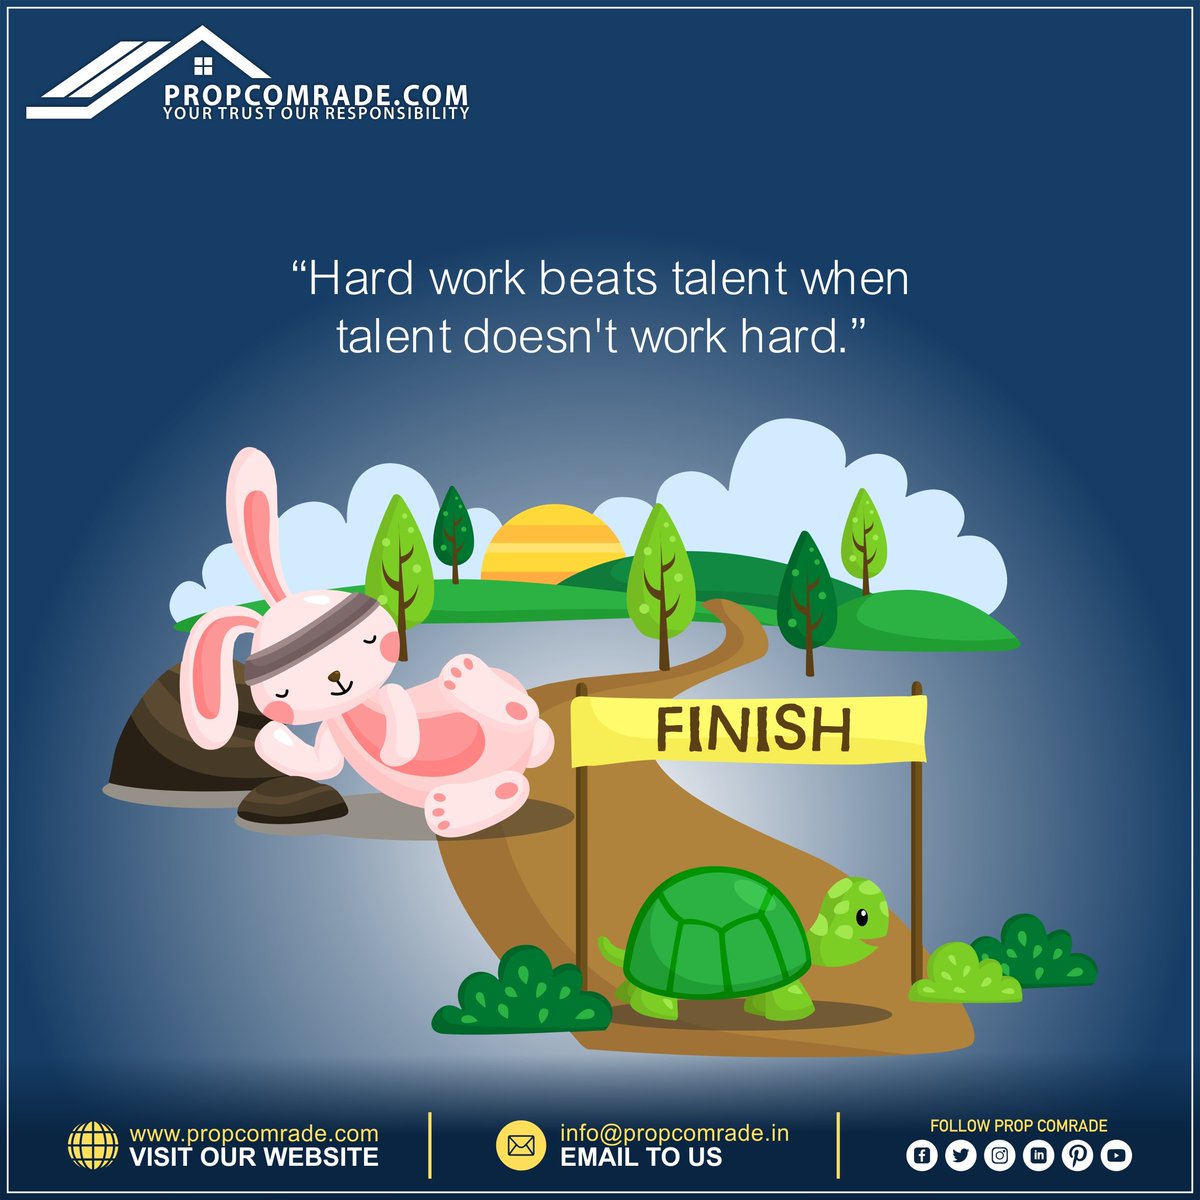 'Hard work beats talent when
talent doesn't work hard'

Good Morning

#propertyforsale #propertyinvestment #propertydevelopment #propertyinvestor
#propertyagent #propertymarket #propertyinvesting #propertysales #propertysearchlagos
#propertyoftheday #propertybusiness